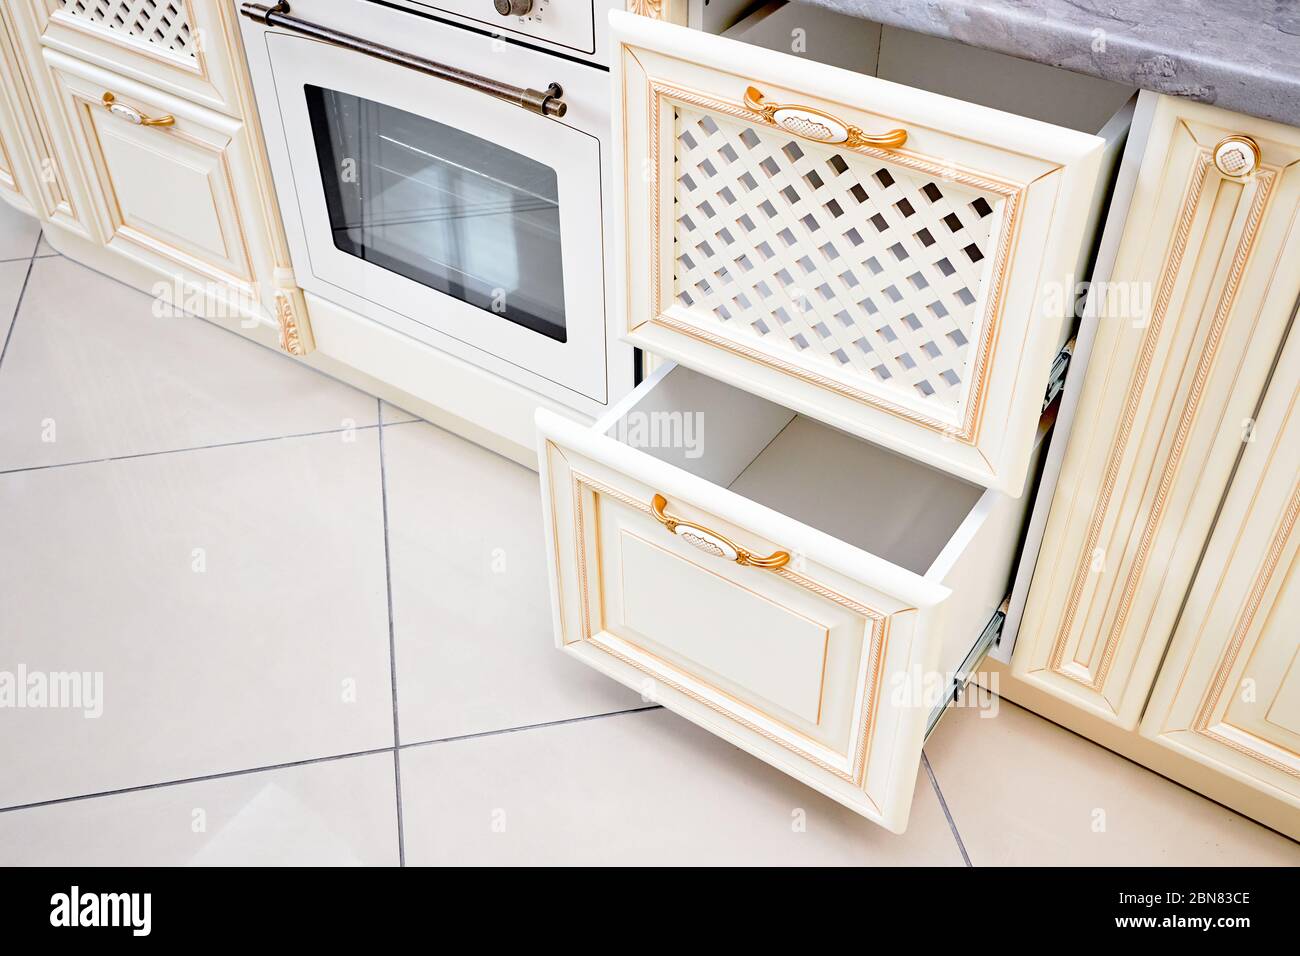 https://c8.alamy.com/comp/2BN83CE/interior-of-modern-kitchen-in-classic-style-with-golden-elements-in-beige-colors-with-built-in-appliances-drawers-for-plates-or-dishes-shelf-under-co-2BN83CE.jpg